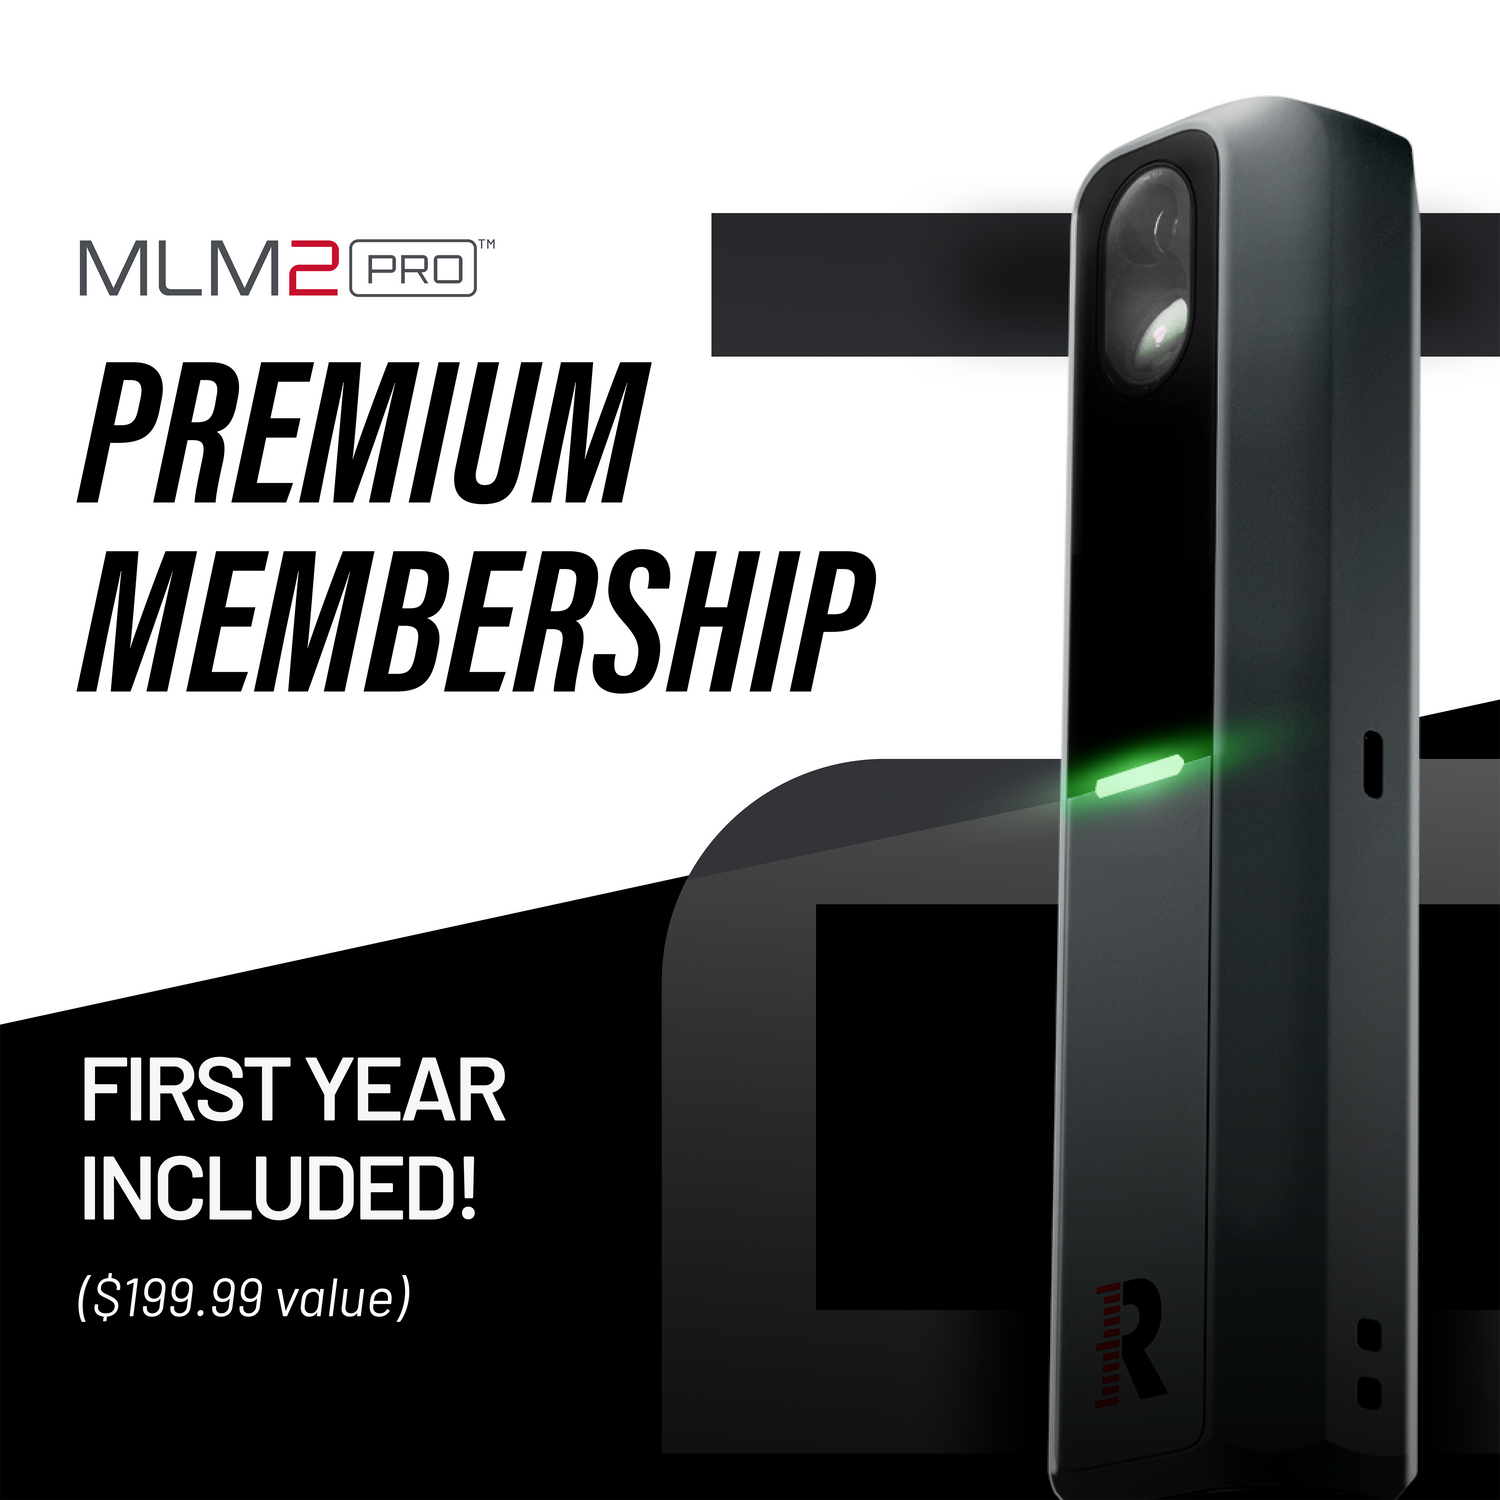 Premium Membership: Included for the First Year!